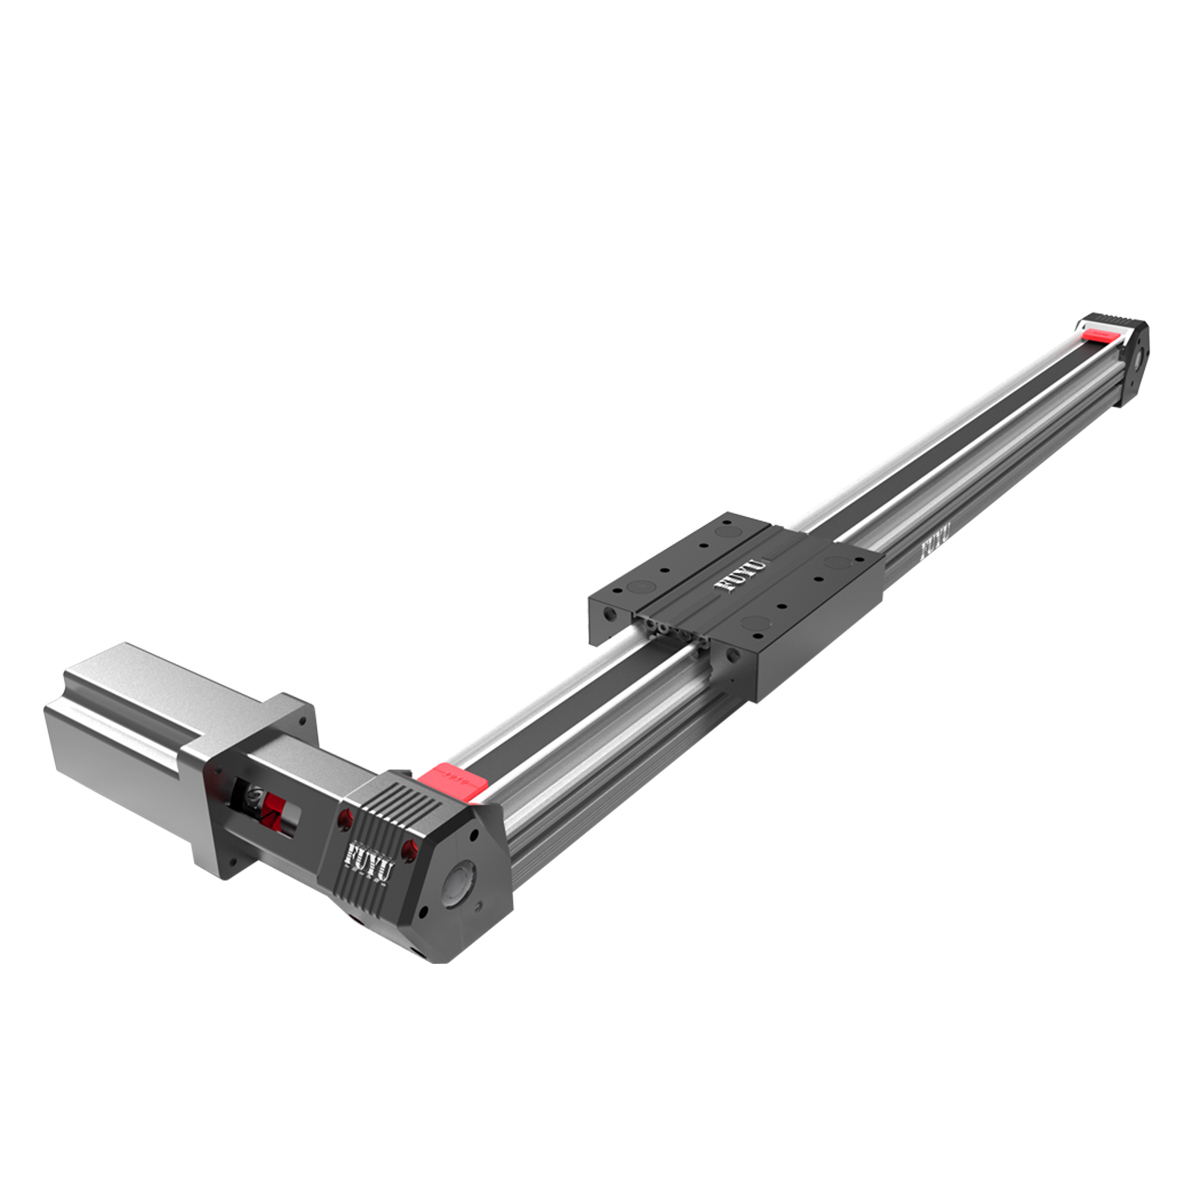 High Speed Low Noisy Lightweight Design Double-axis Timing-belt Linear Motion Guide